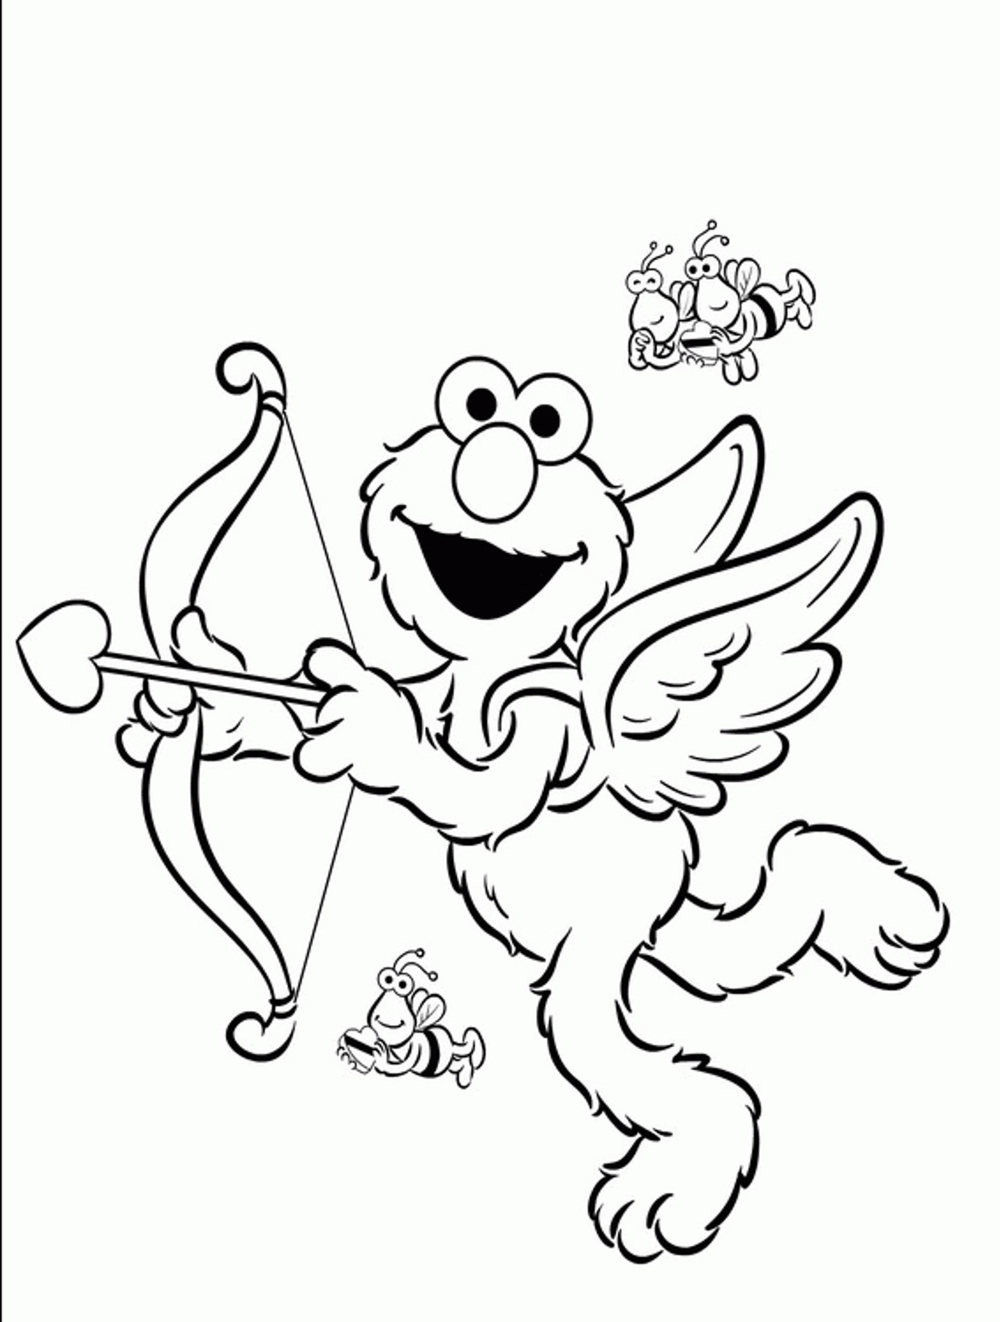 Baby Elmo Coloring Pages at GetColorings.com | Free printable colorings